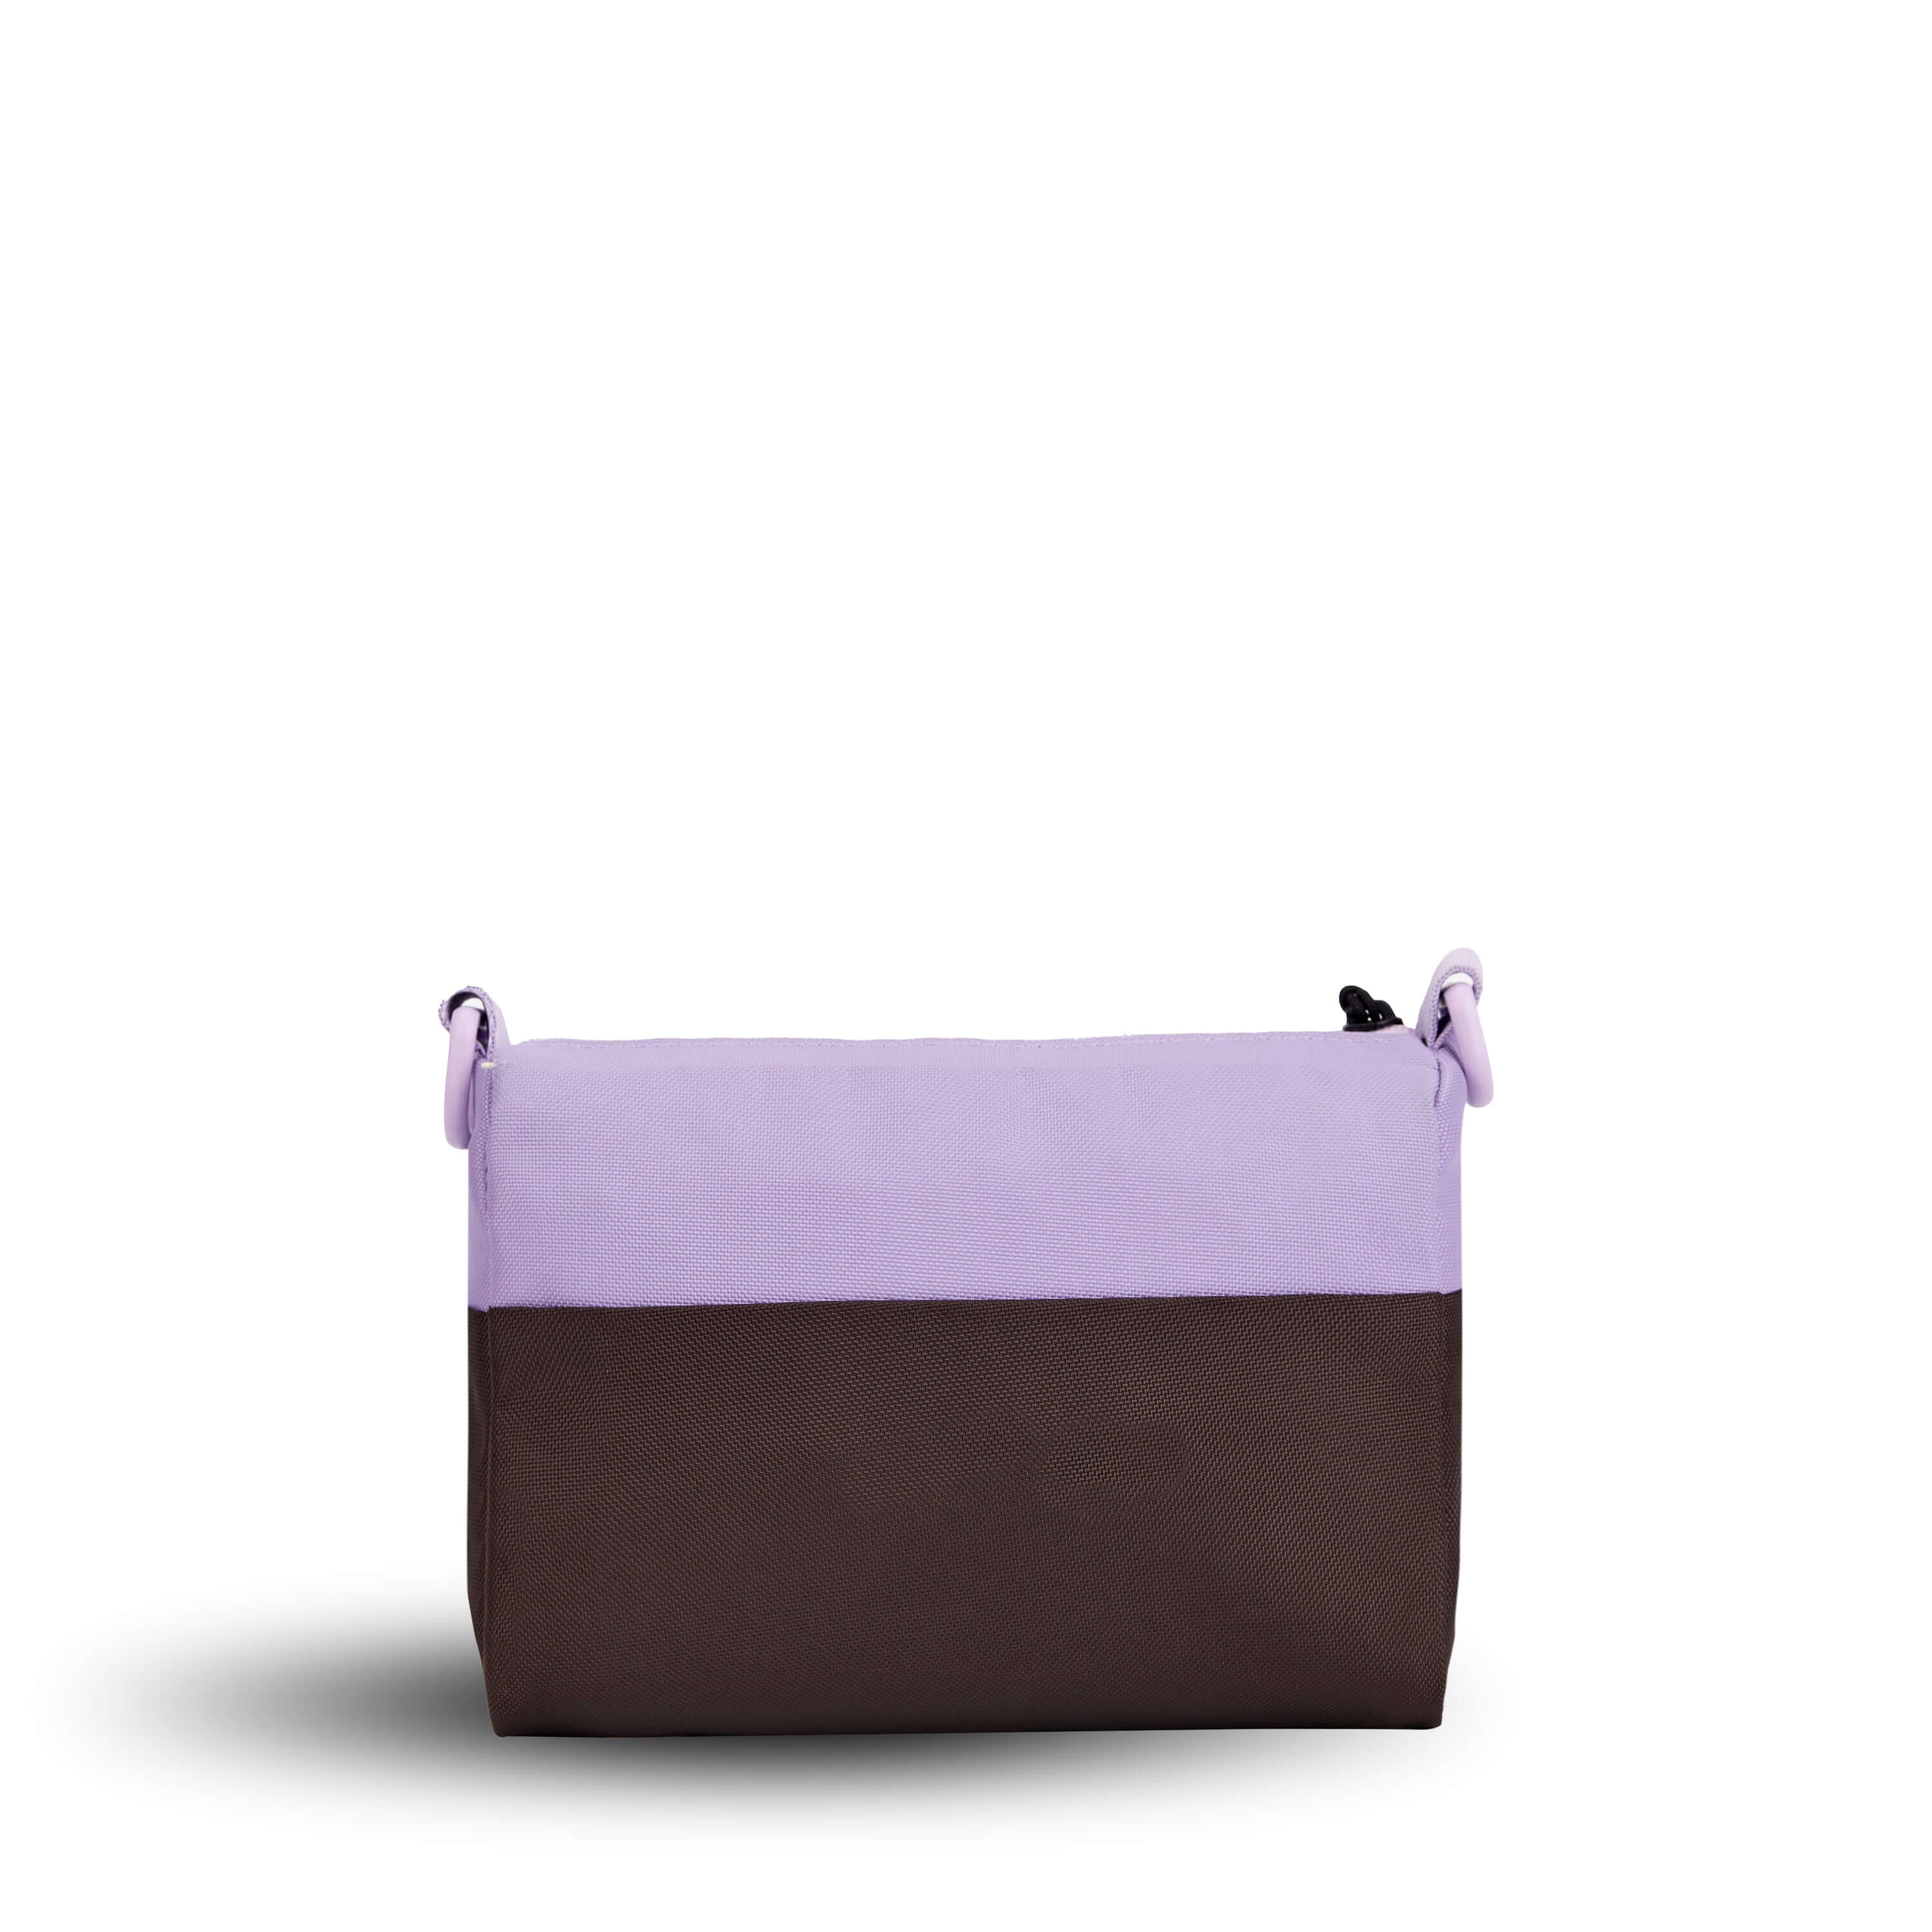 Back view of Sherpani's purse, the Skye in Lavender. It is two-toned, the top half of the bag is lavender and the bottom half of the bag is brown. 